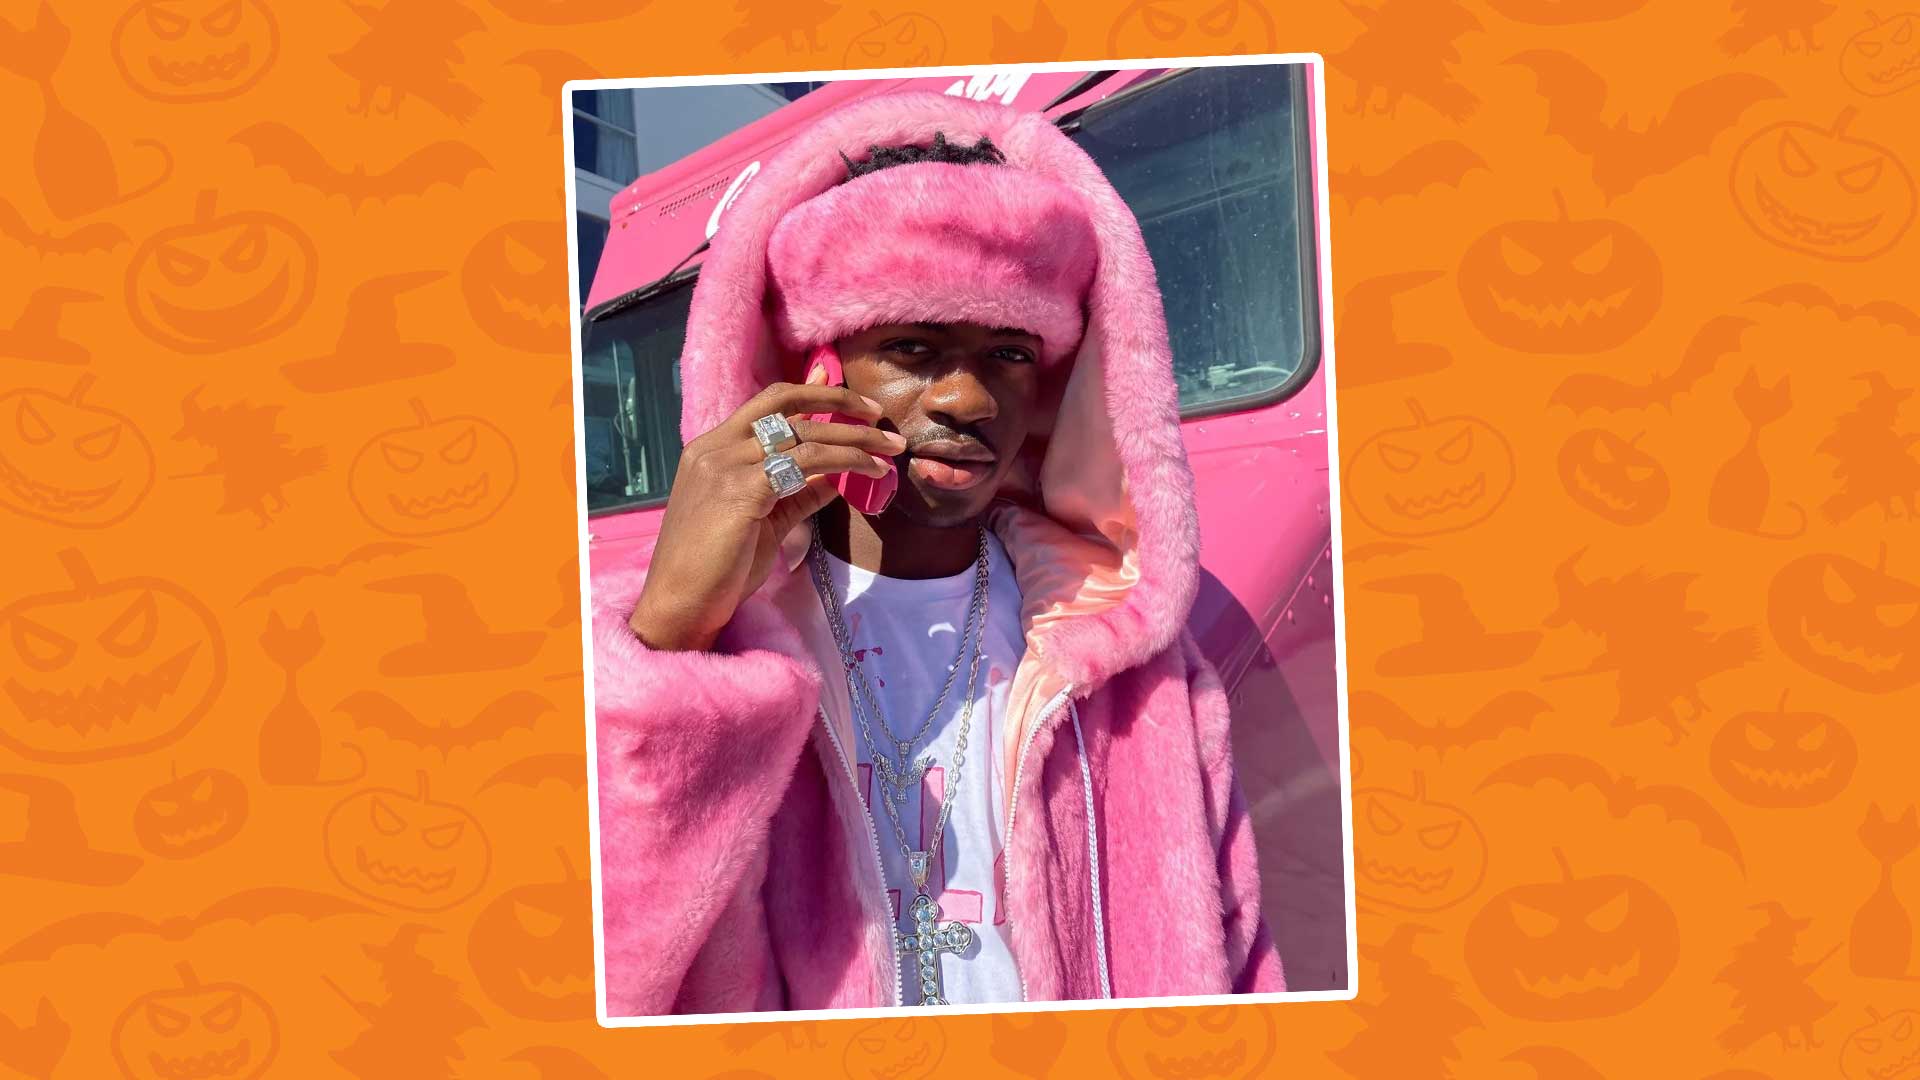 Lil Nas X dressed as a pink rabbit